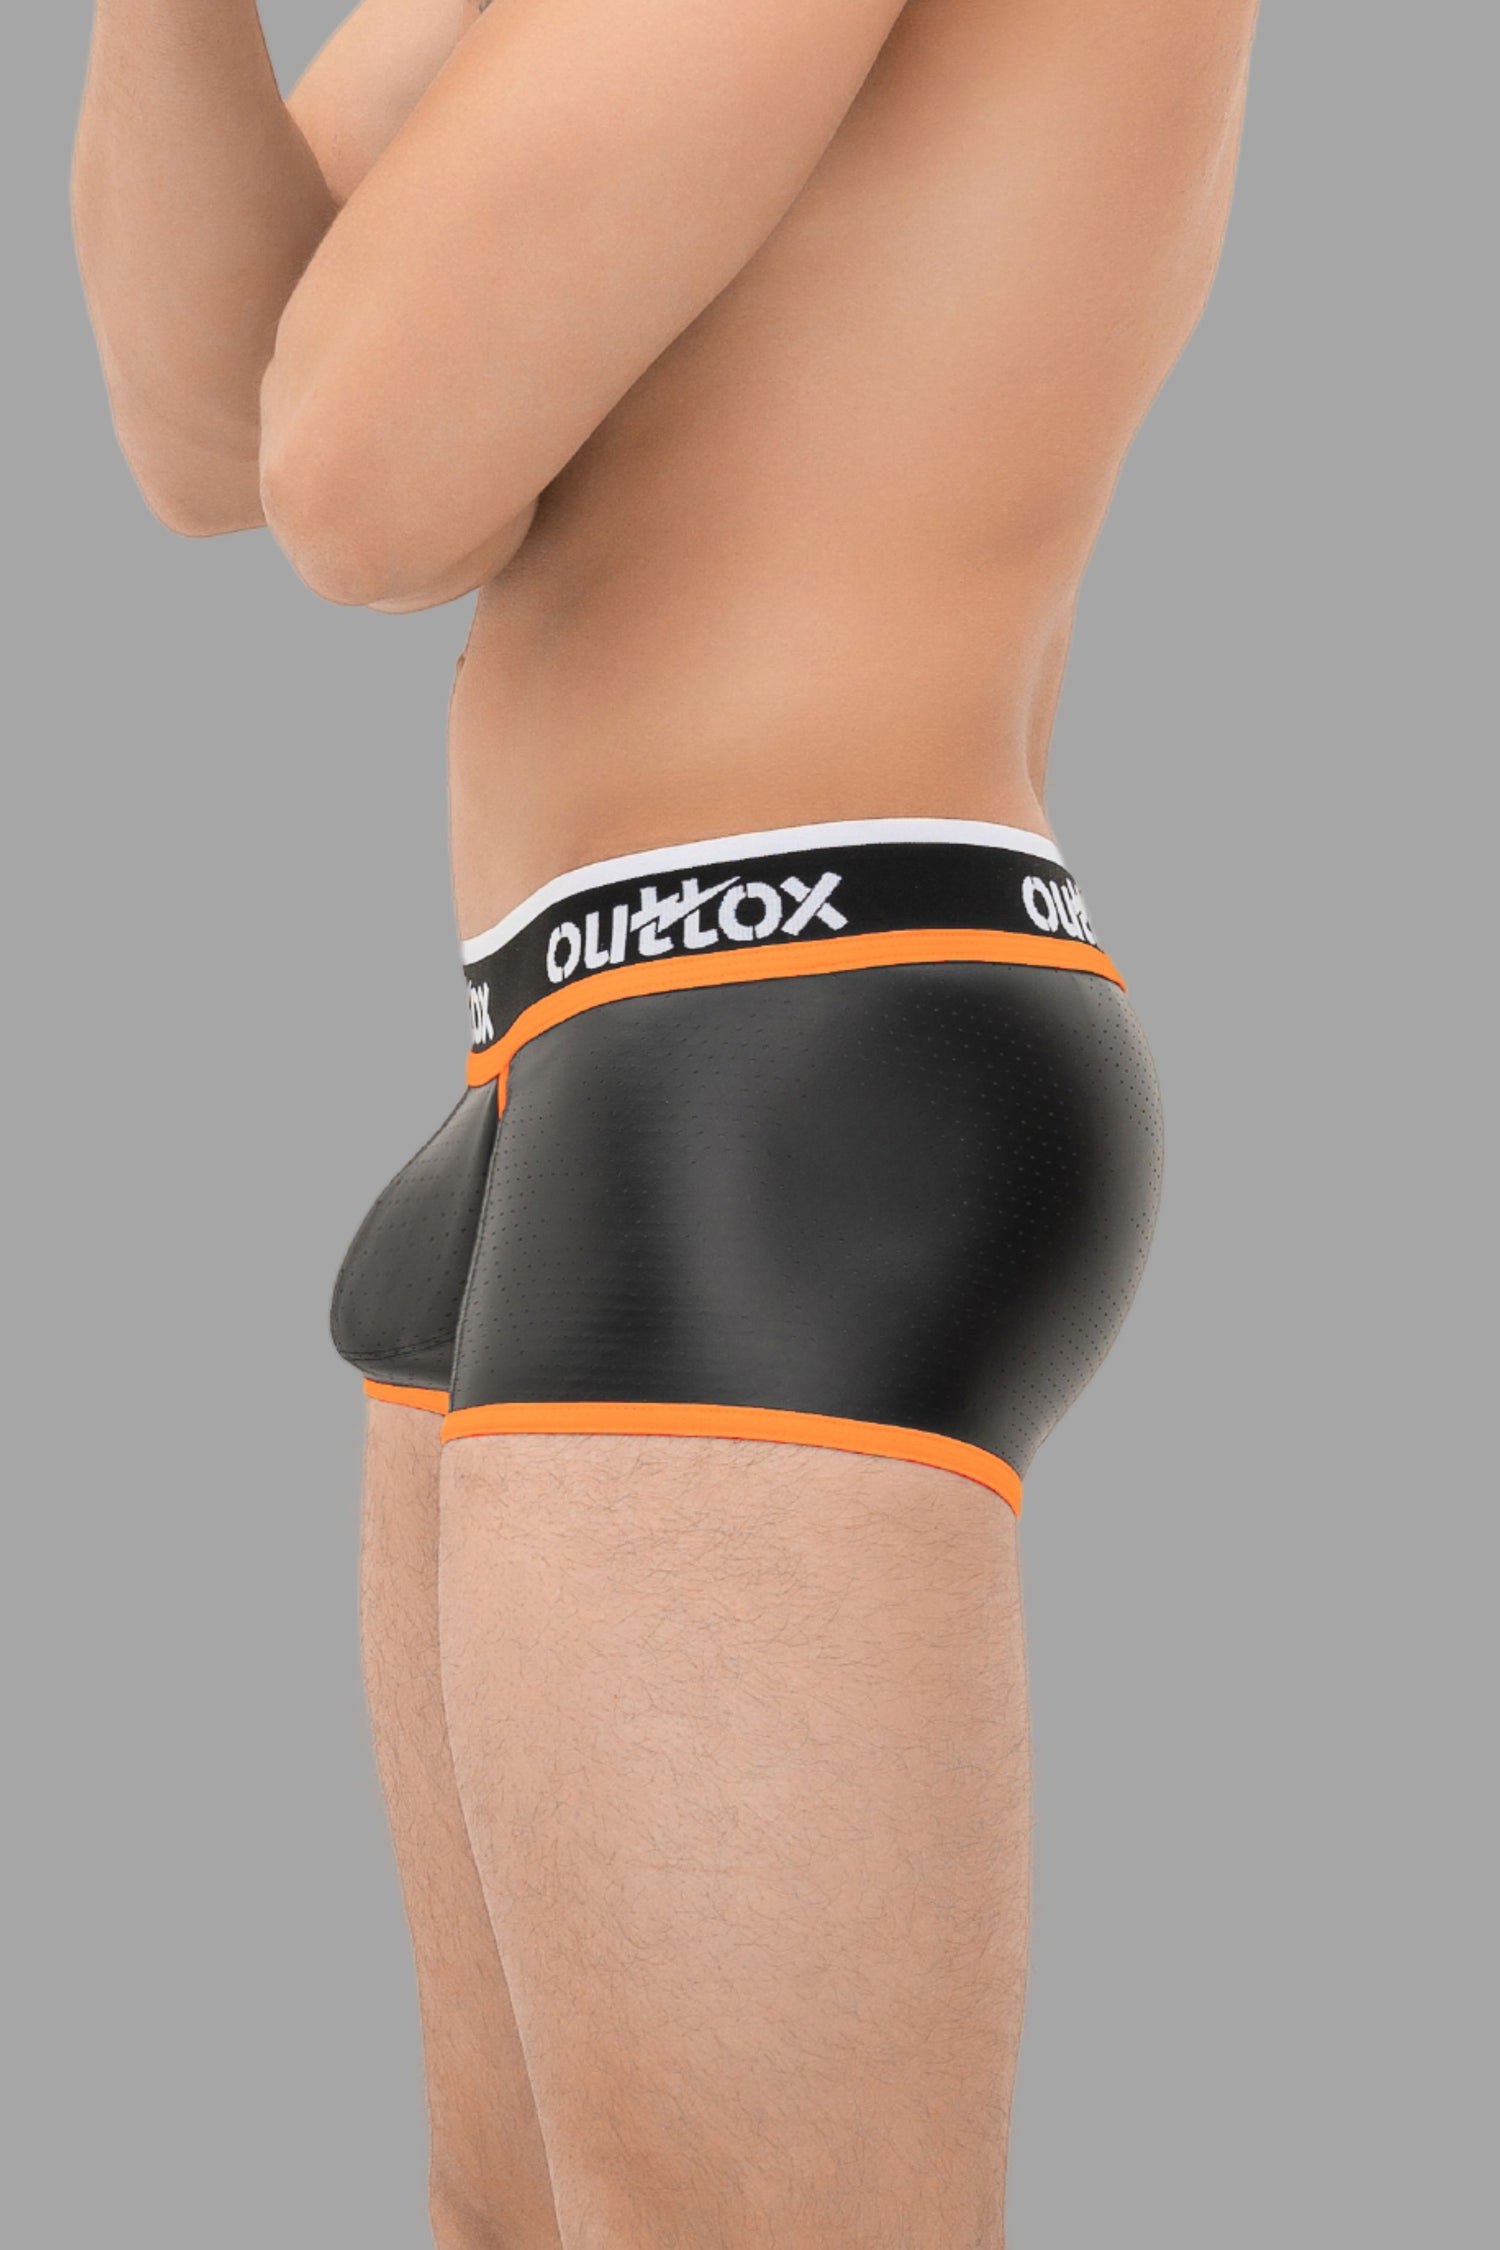 Outtox. Wrapped Rear Trunk Shorts with Snap Codpiece. Black+Orange